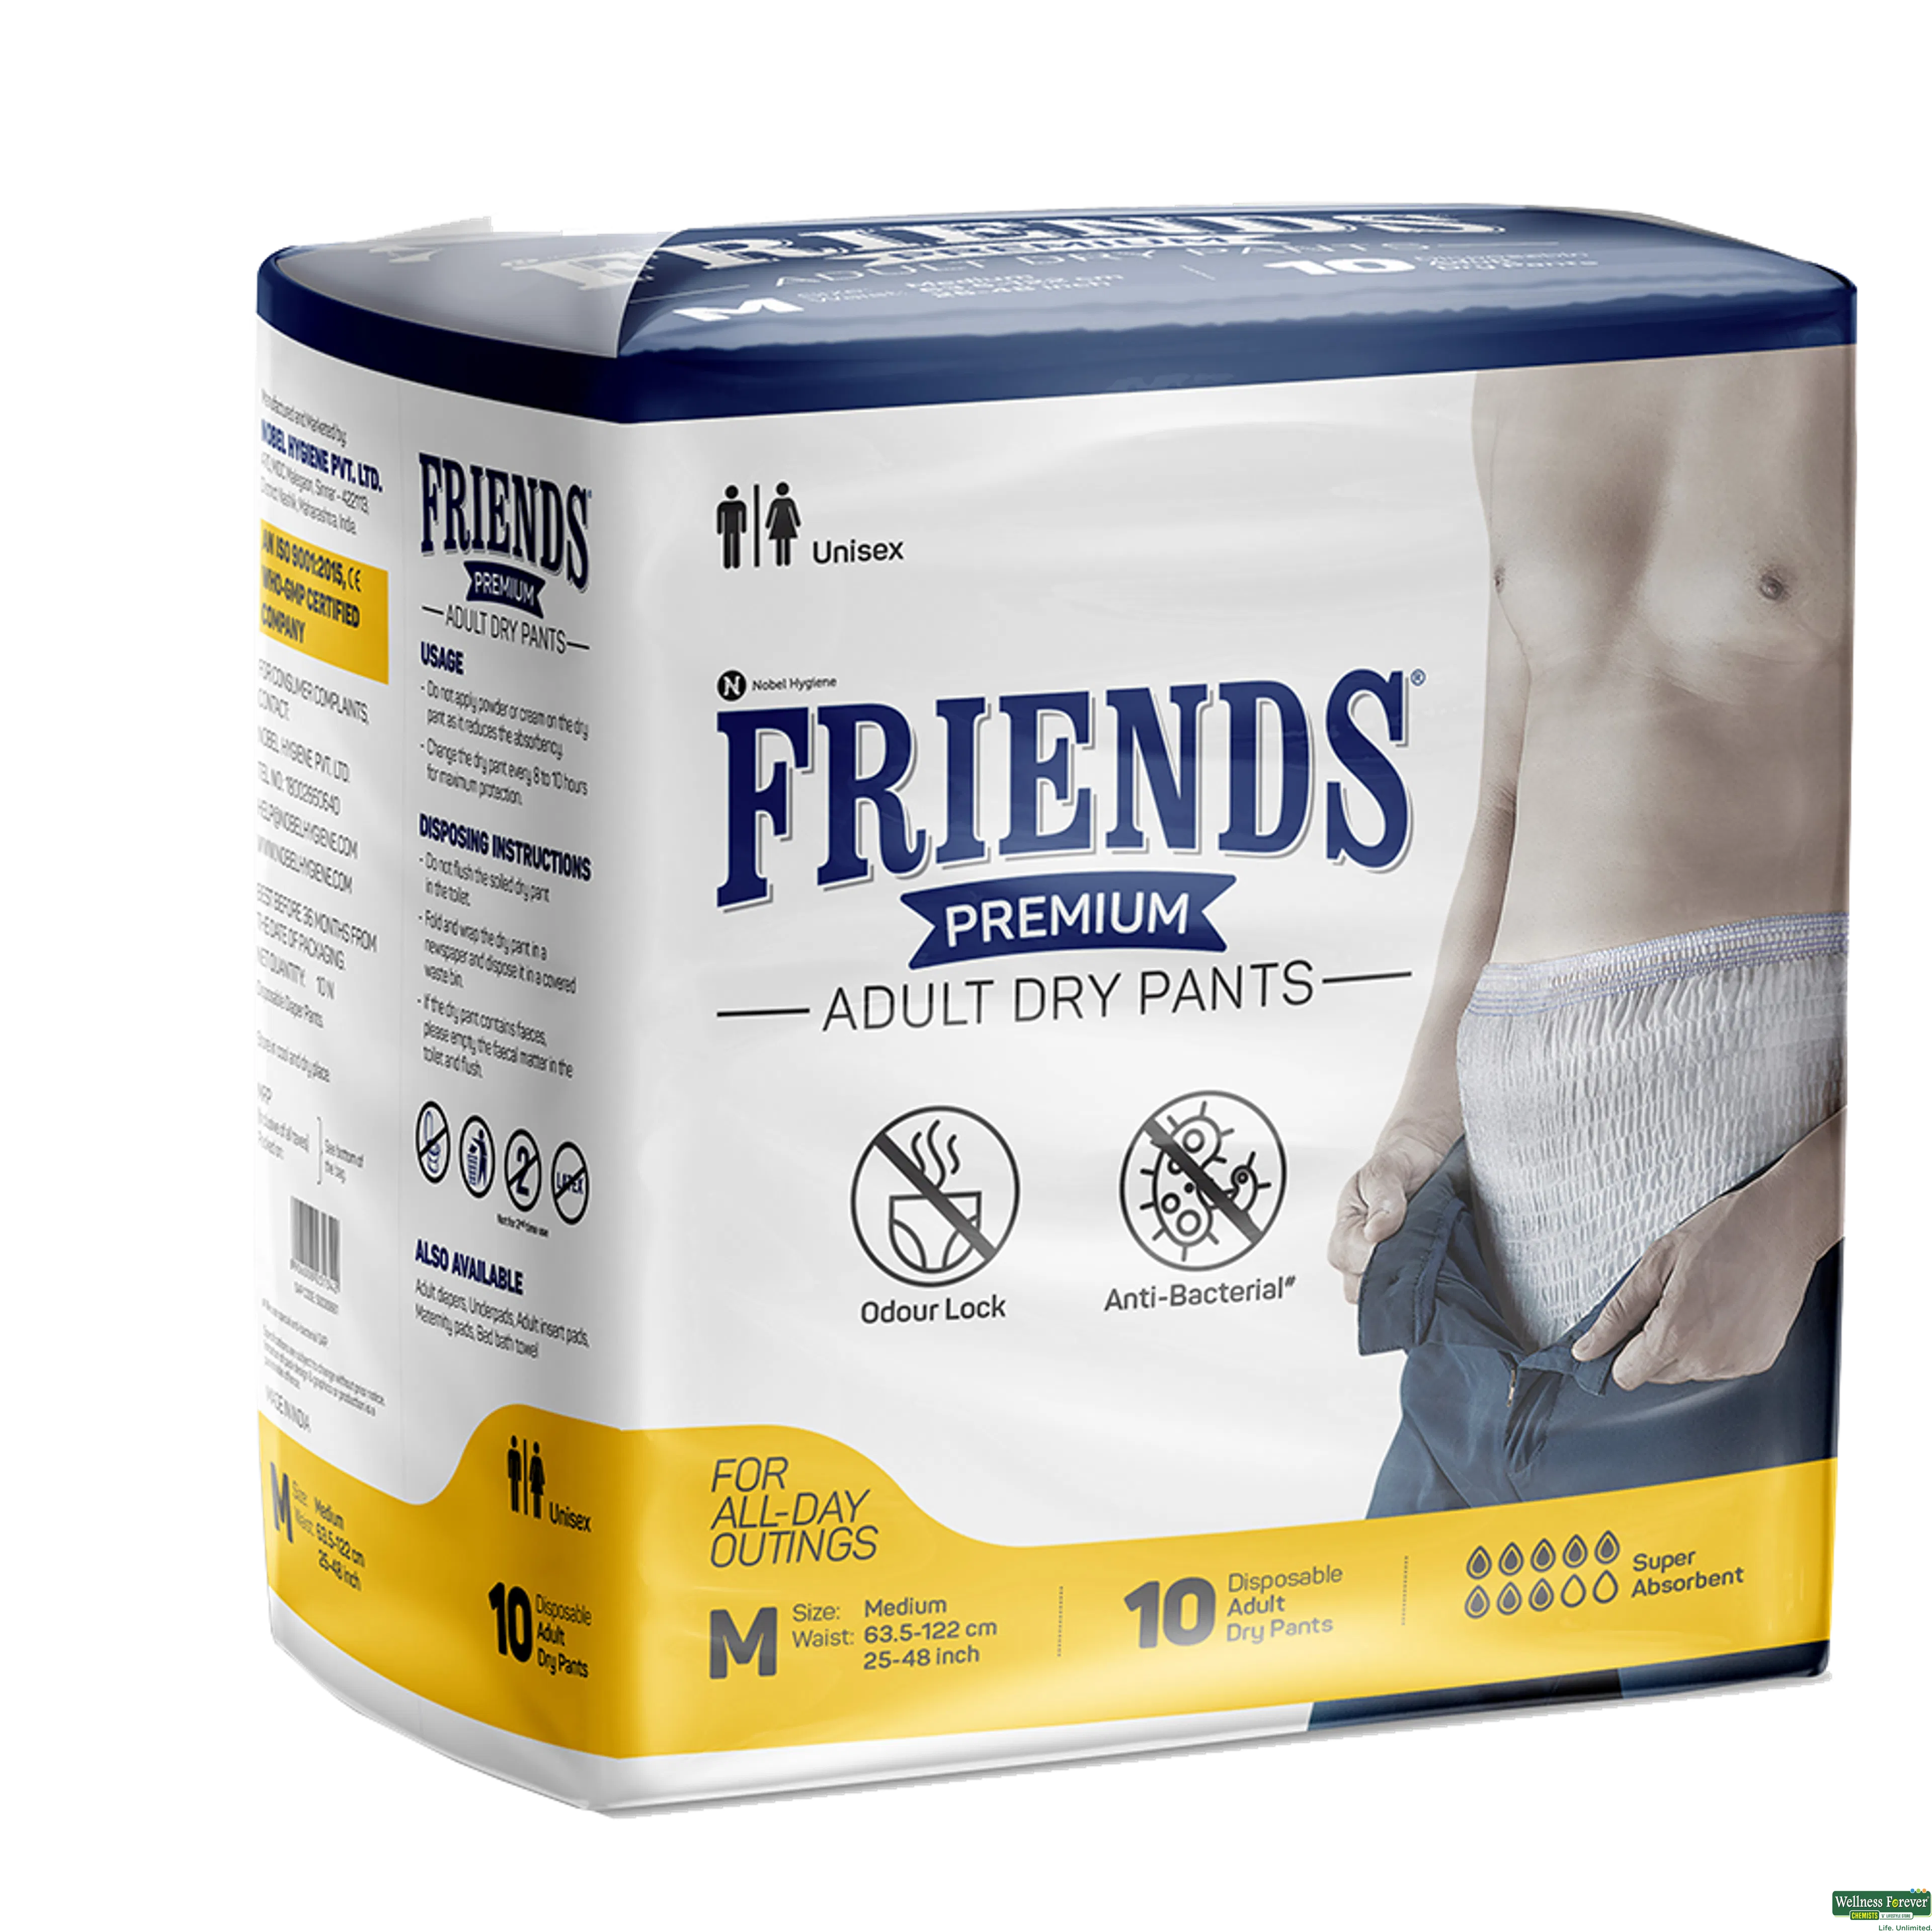 Adult Diapers- XL / L / M